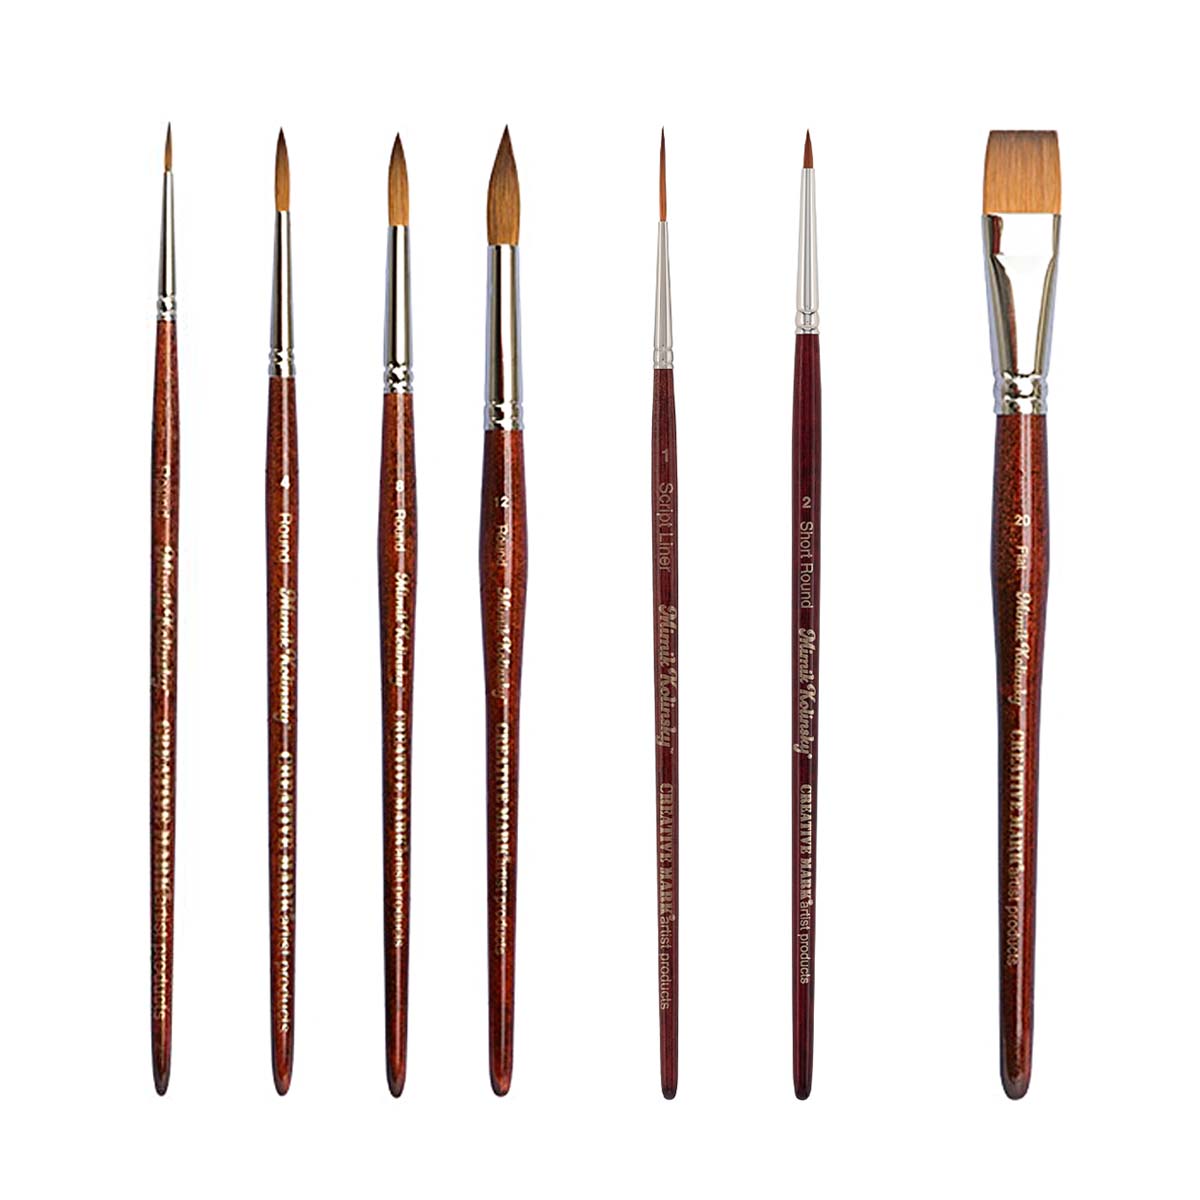 A Quick Update on Kolinsky Sable Brushes